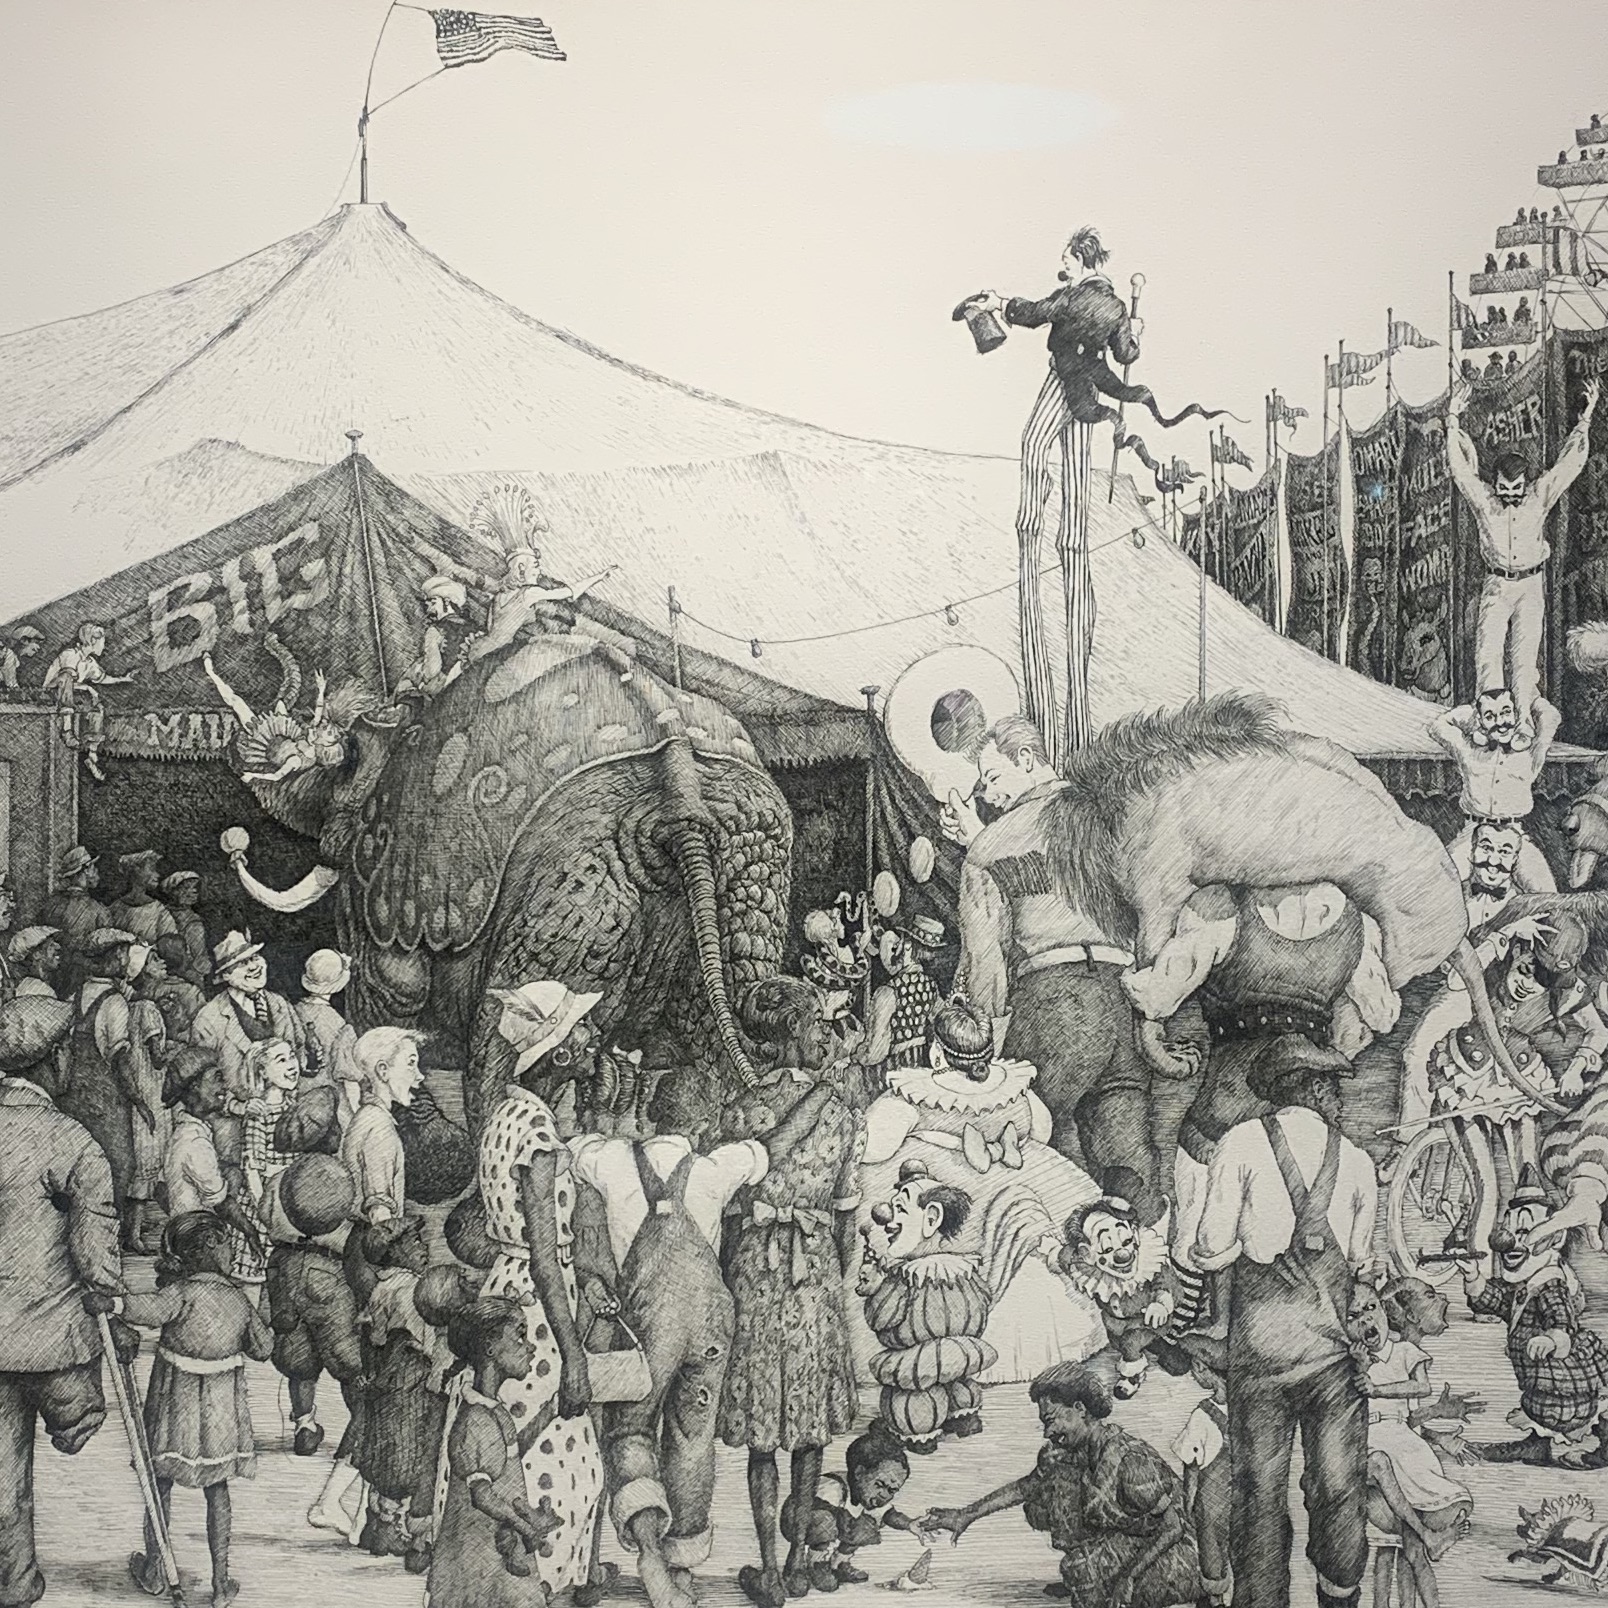 Circus 1930: Image Description: Black and white image of many people in front of a circus ground